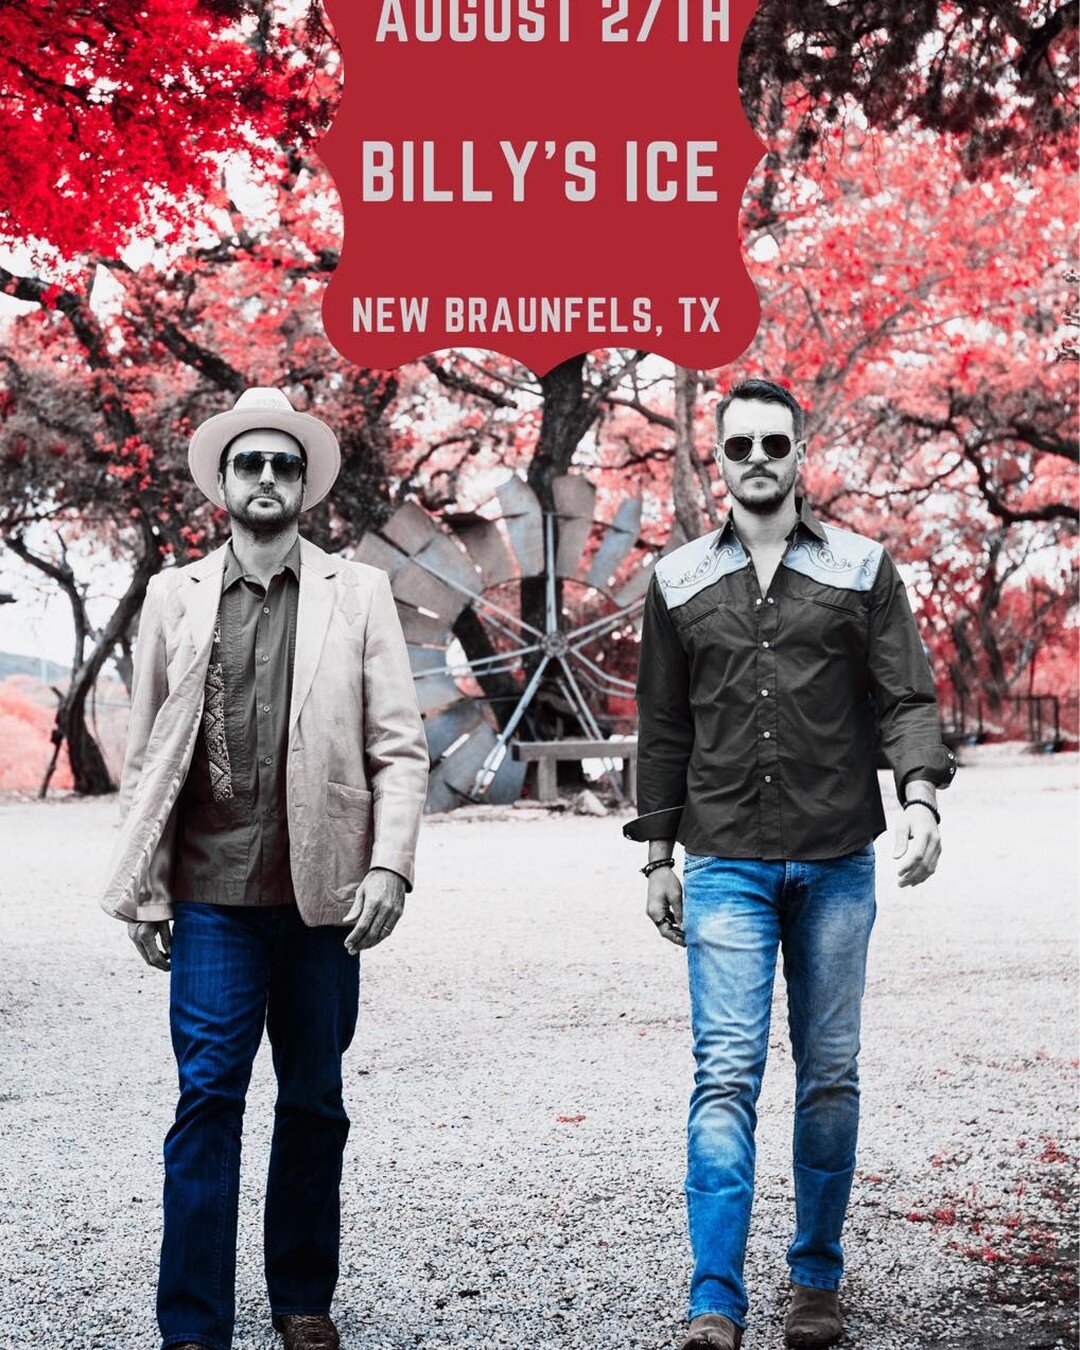 Come join us at Billy's Ice in New Braunfels on August 27th!